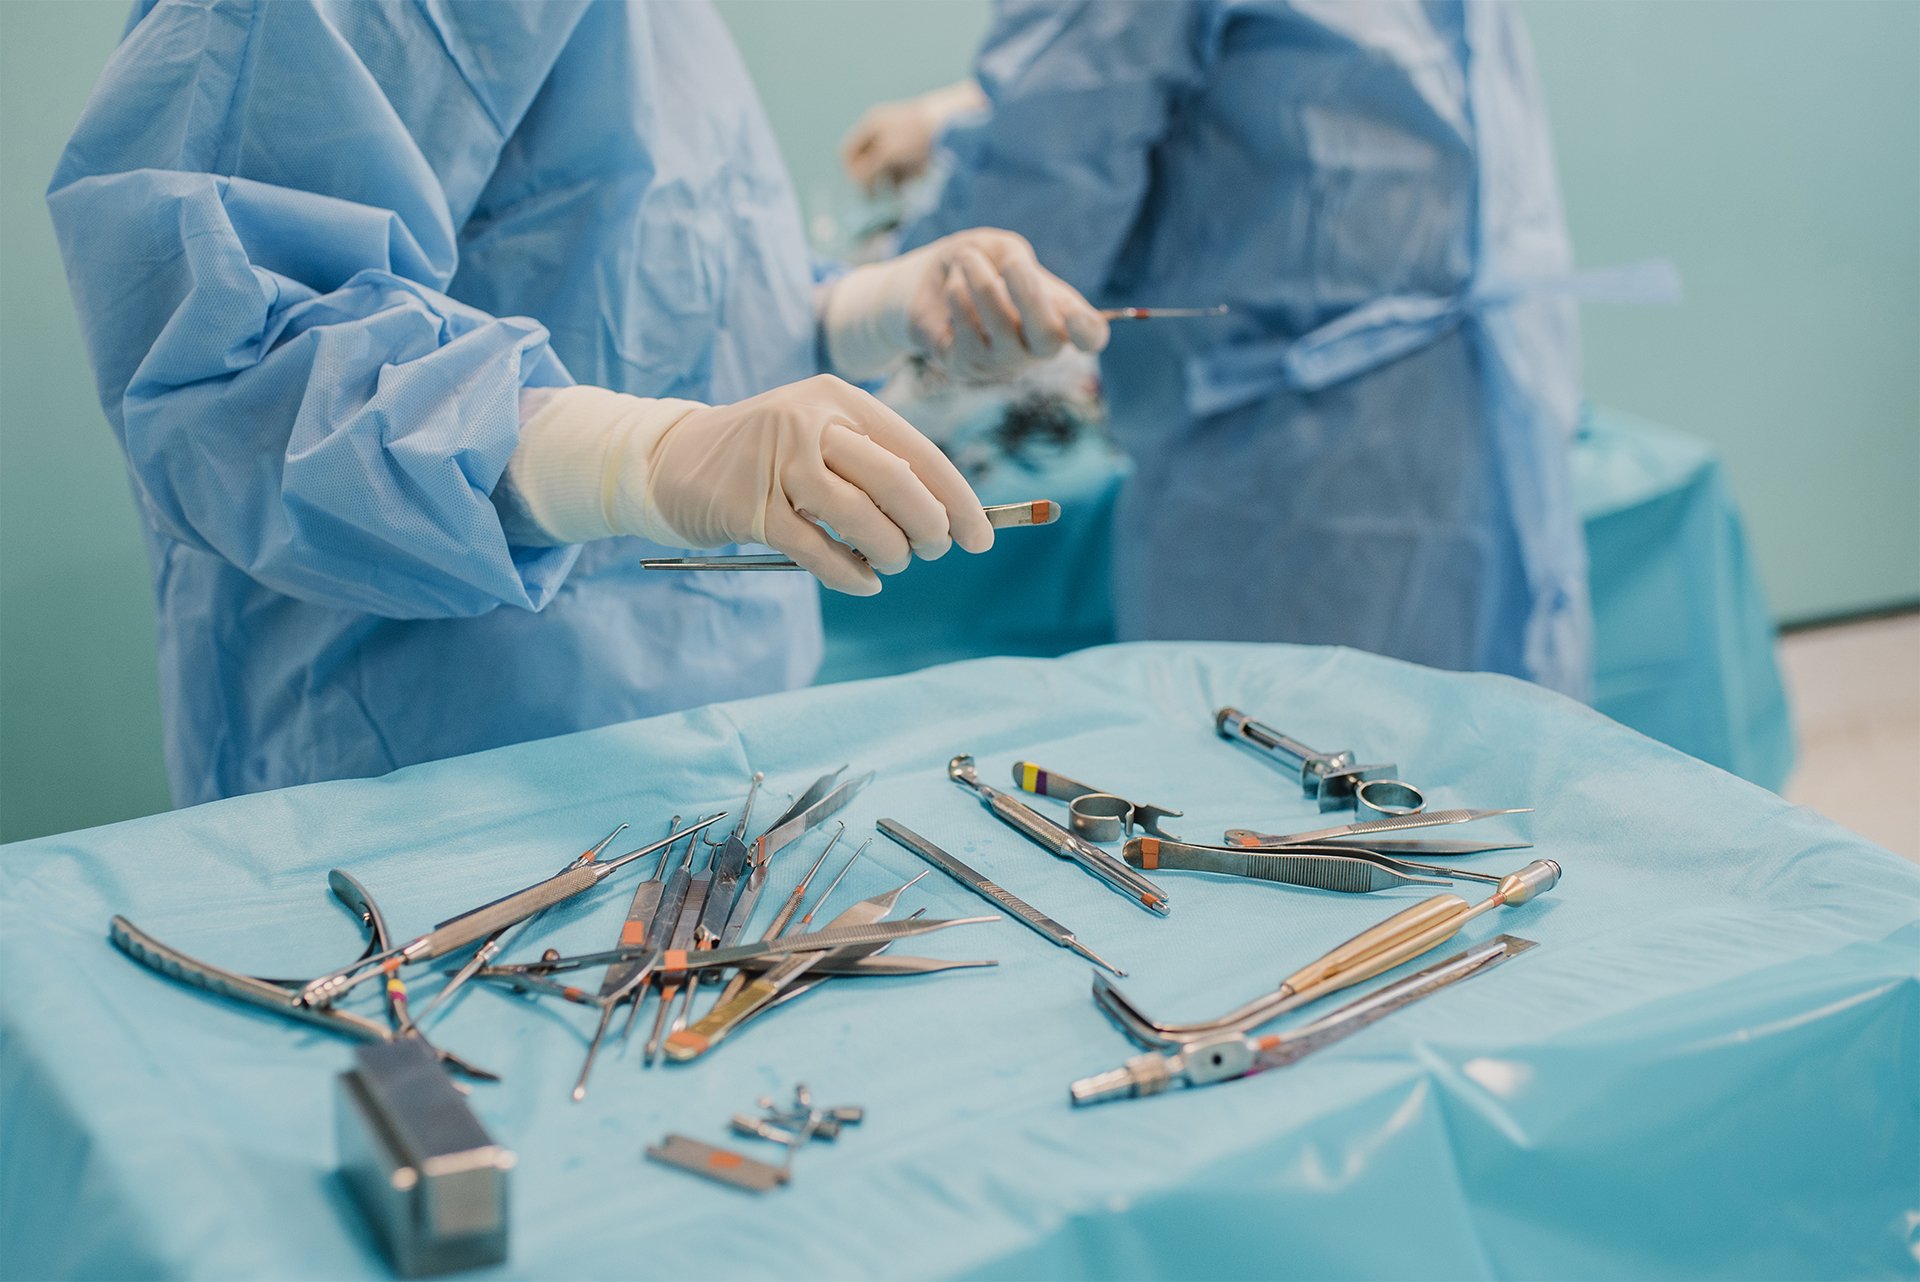 Tomorrow's Operating Rooms: ASCs and the Future of Surgery